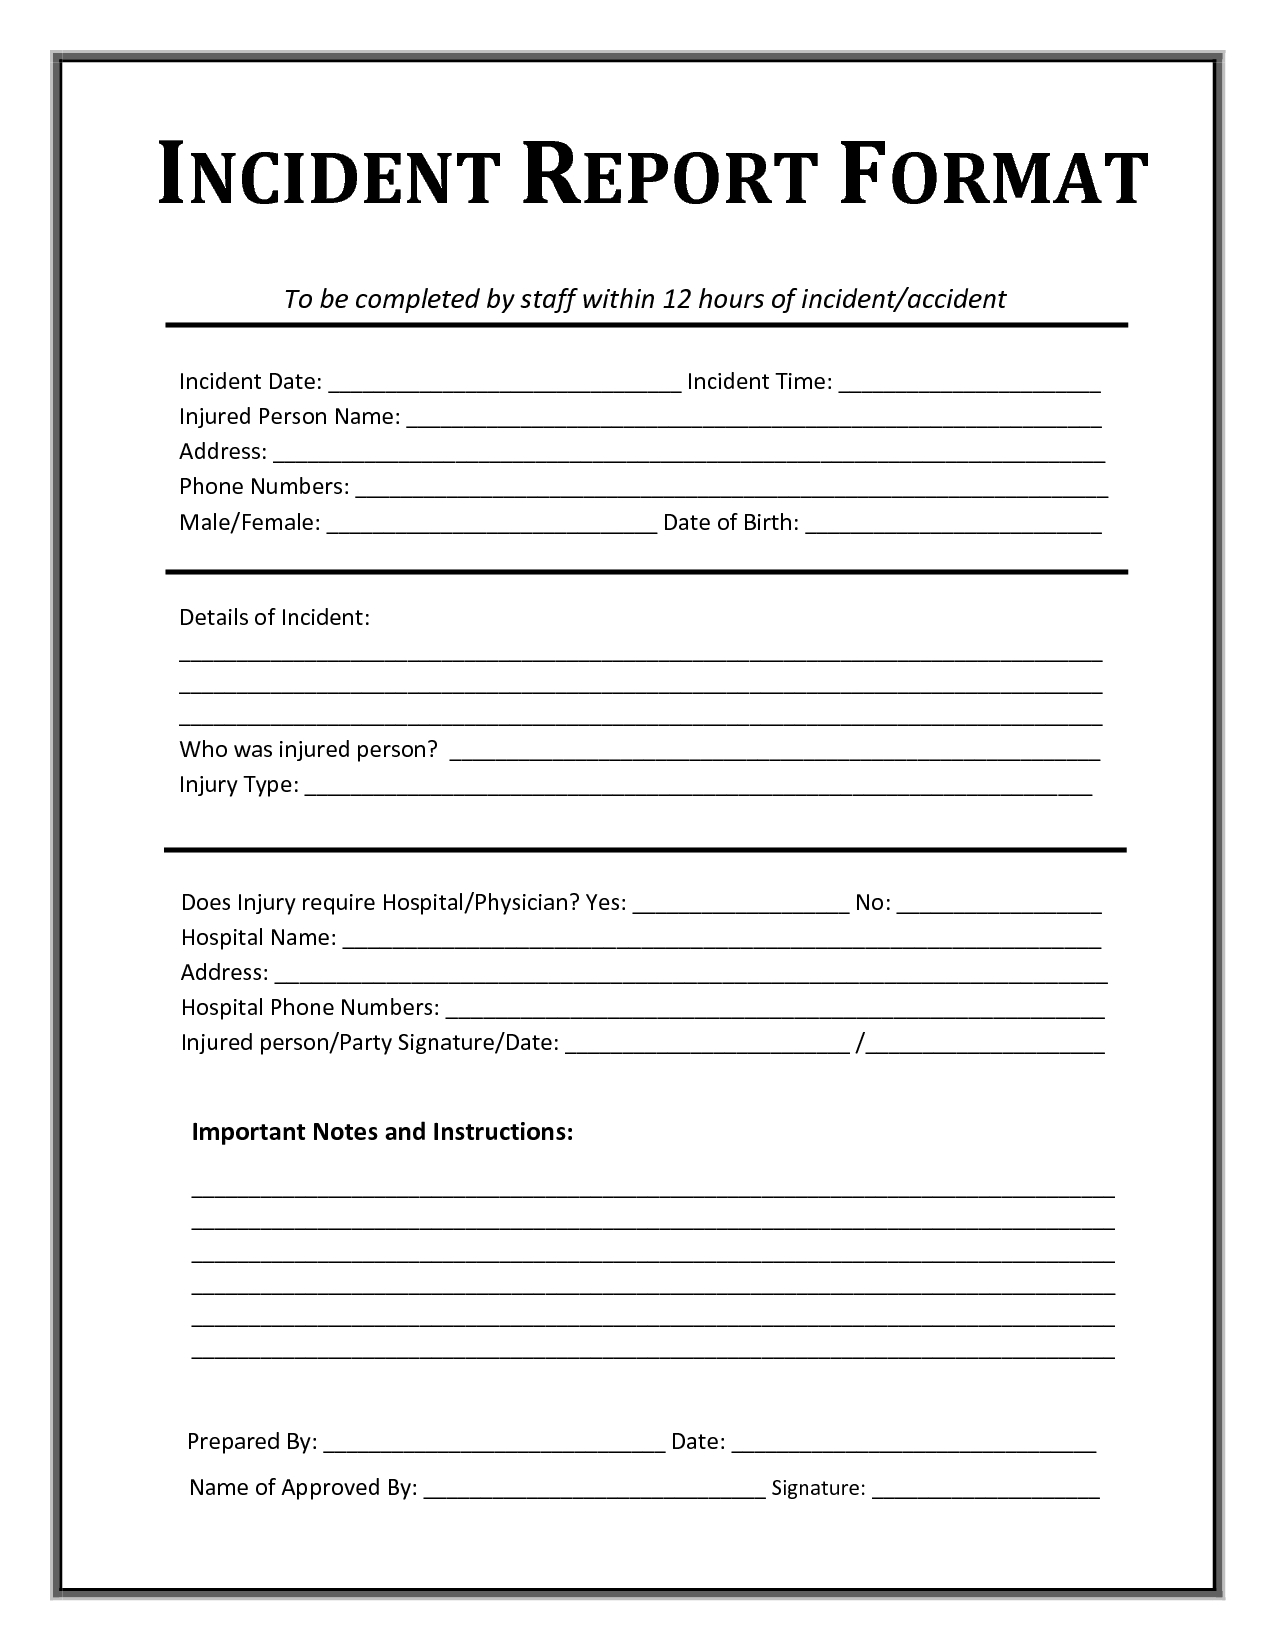 Incident Report Template | Incident Report Form, Incident In Incident Report Register Template